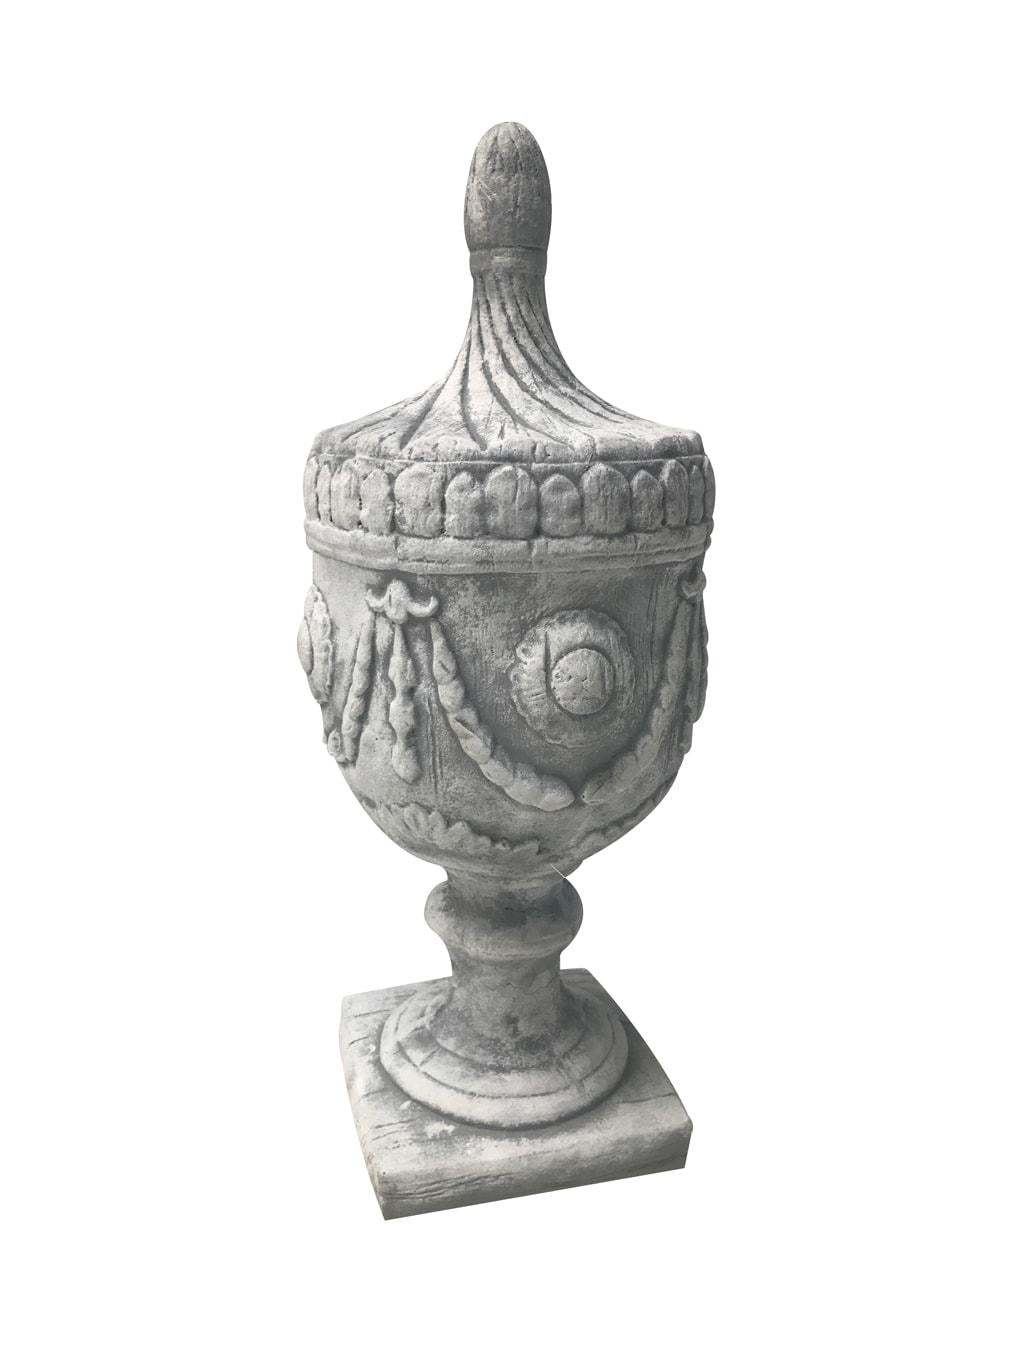 Urn Shaped Decorative Finial Garden Decoration from Antiqued White Stone